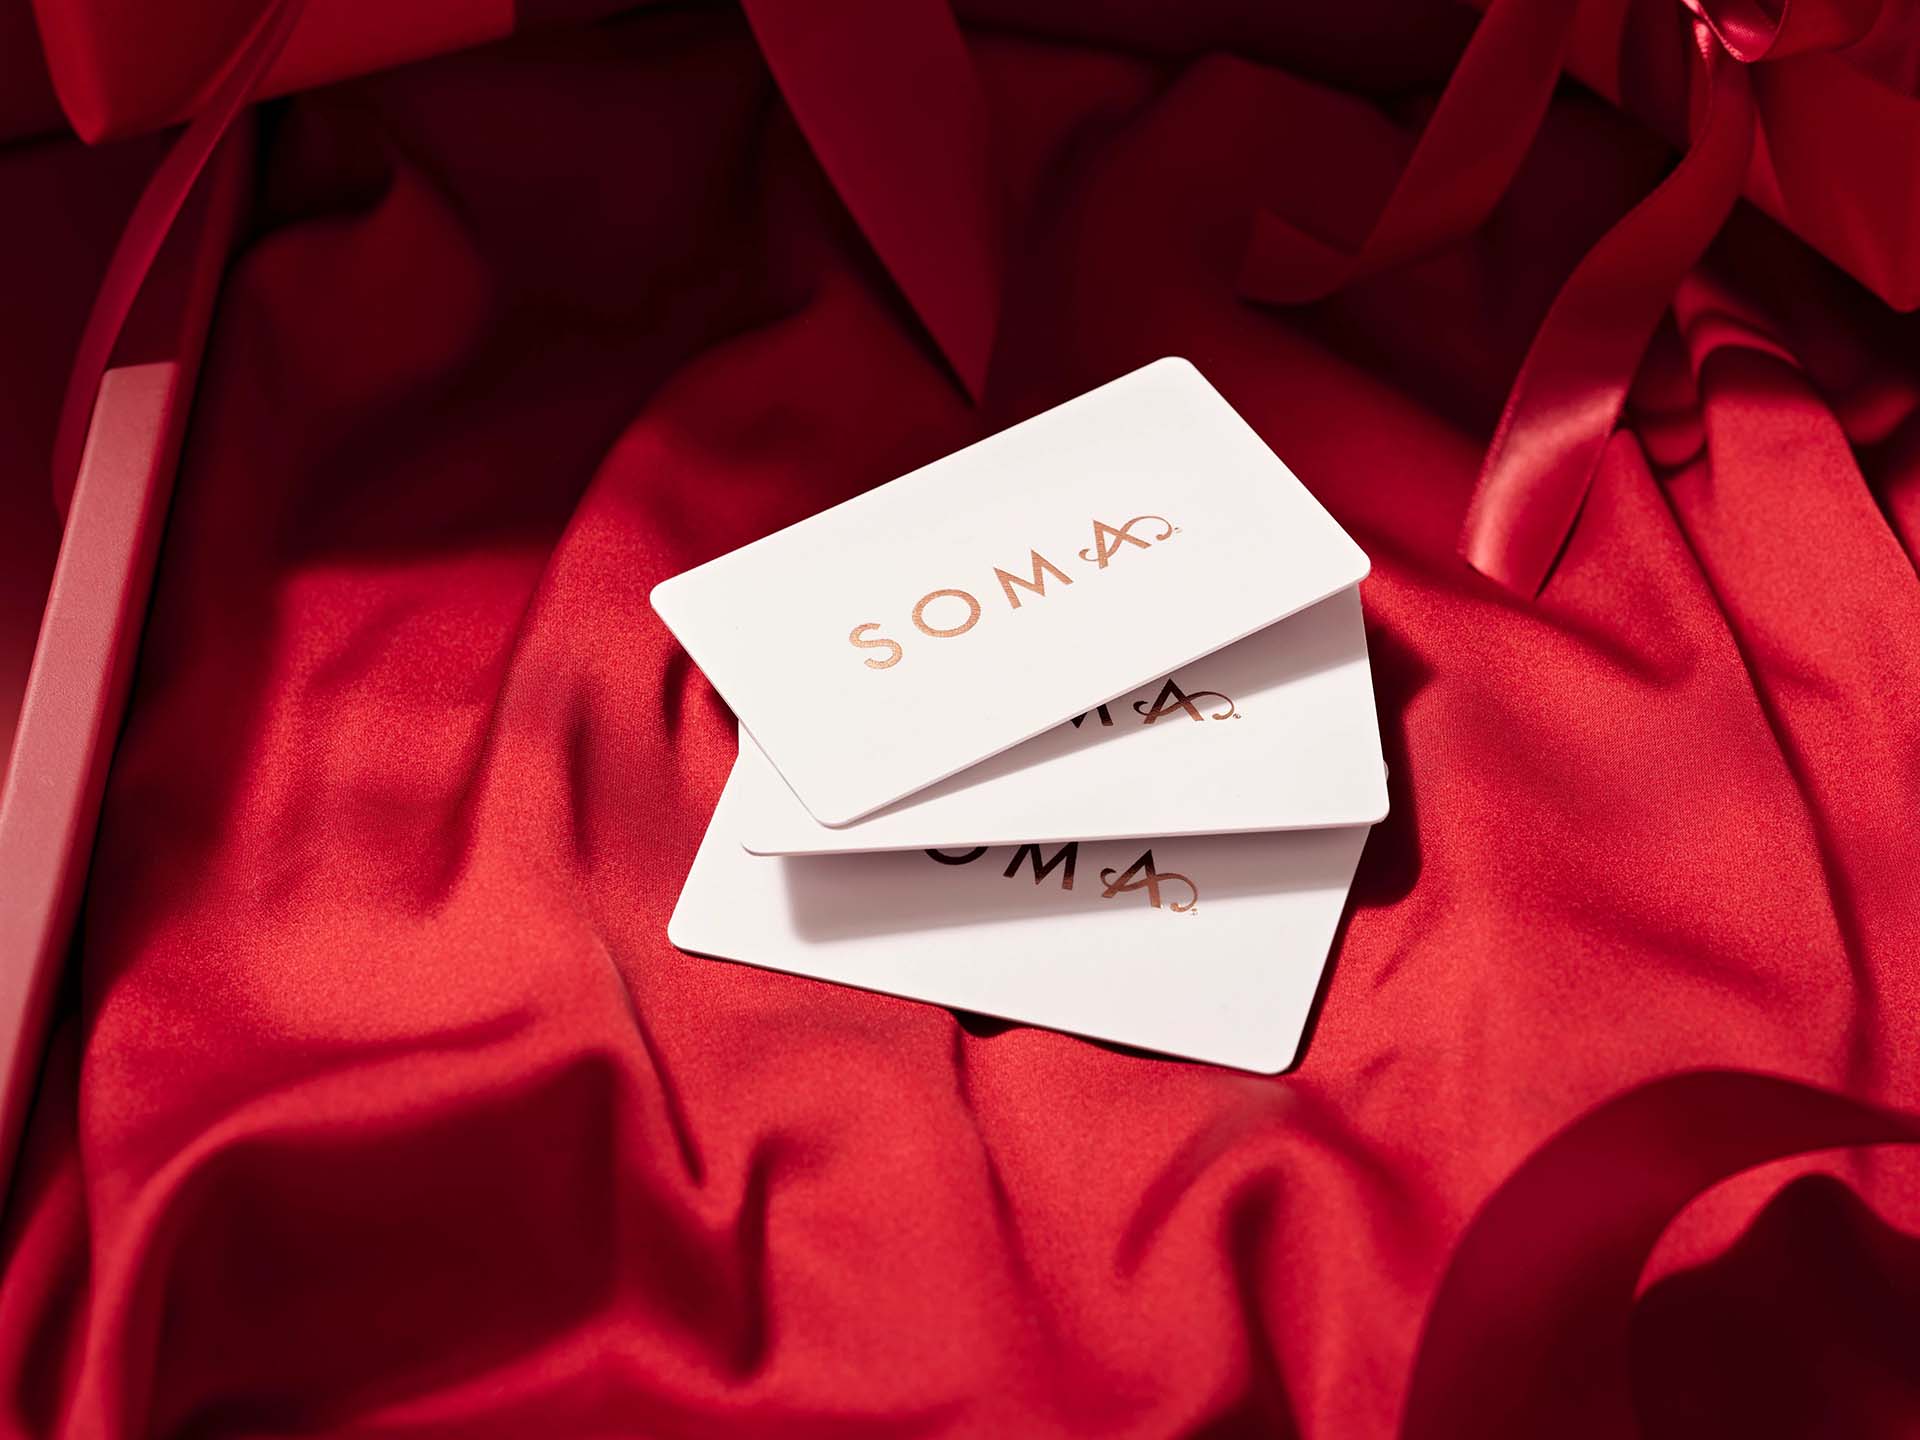 Soma<sup class=st-superscript>®</sup> laydown of red satin fabric with three Soma<sup class=st-superscript>®</sup> giftcards displayed in a fanned out pile.